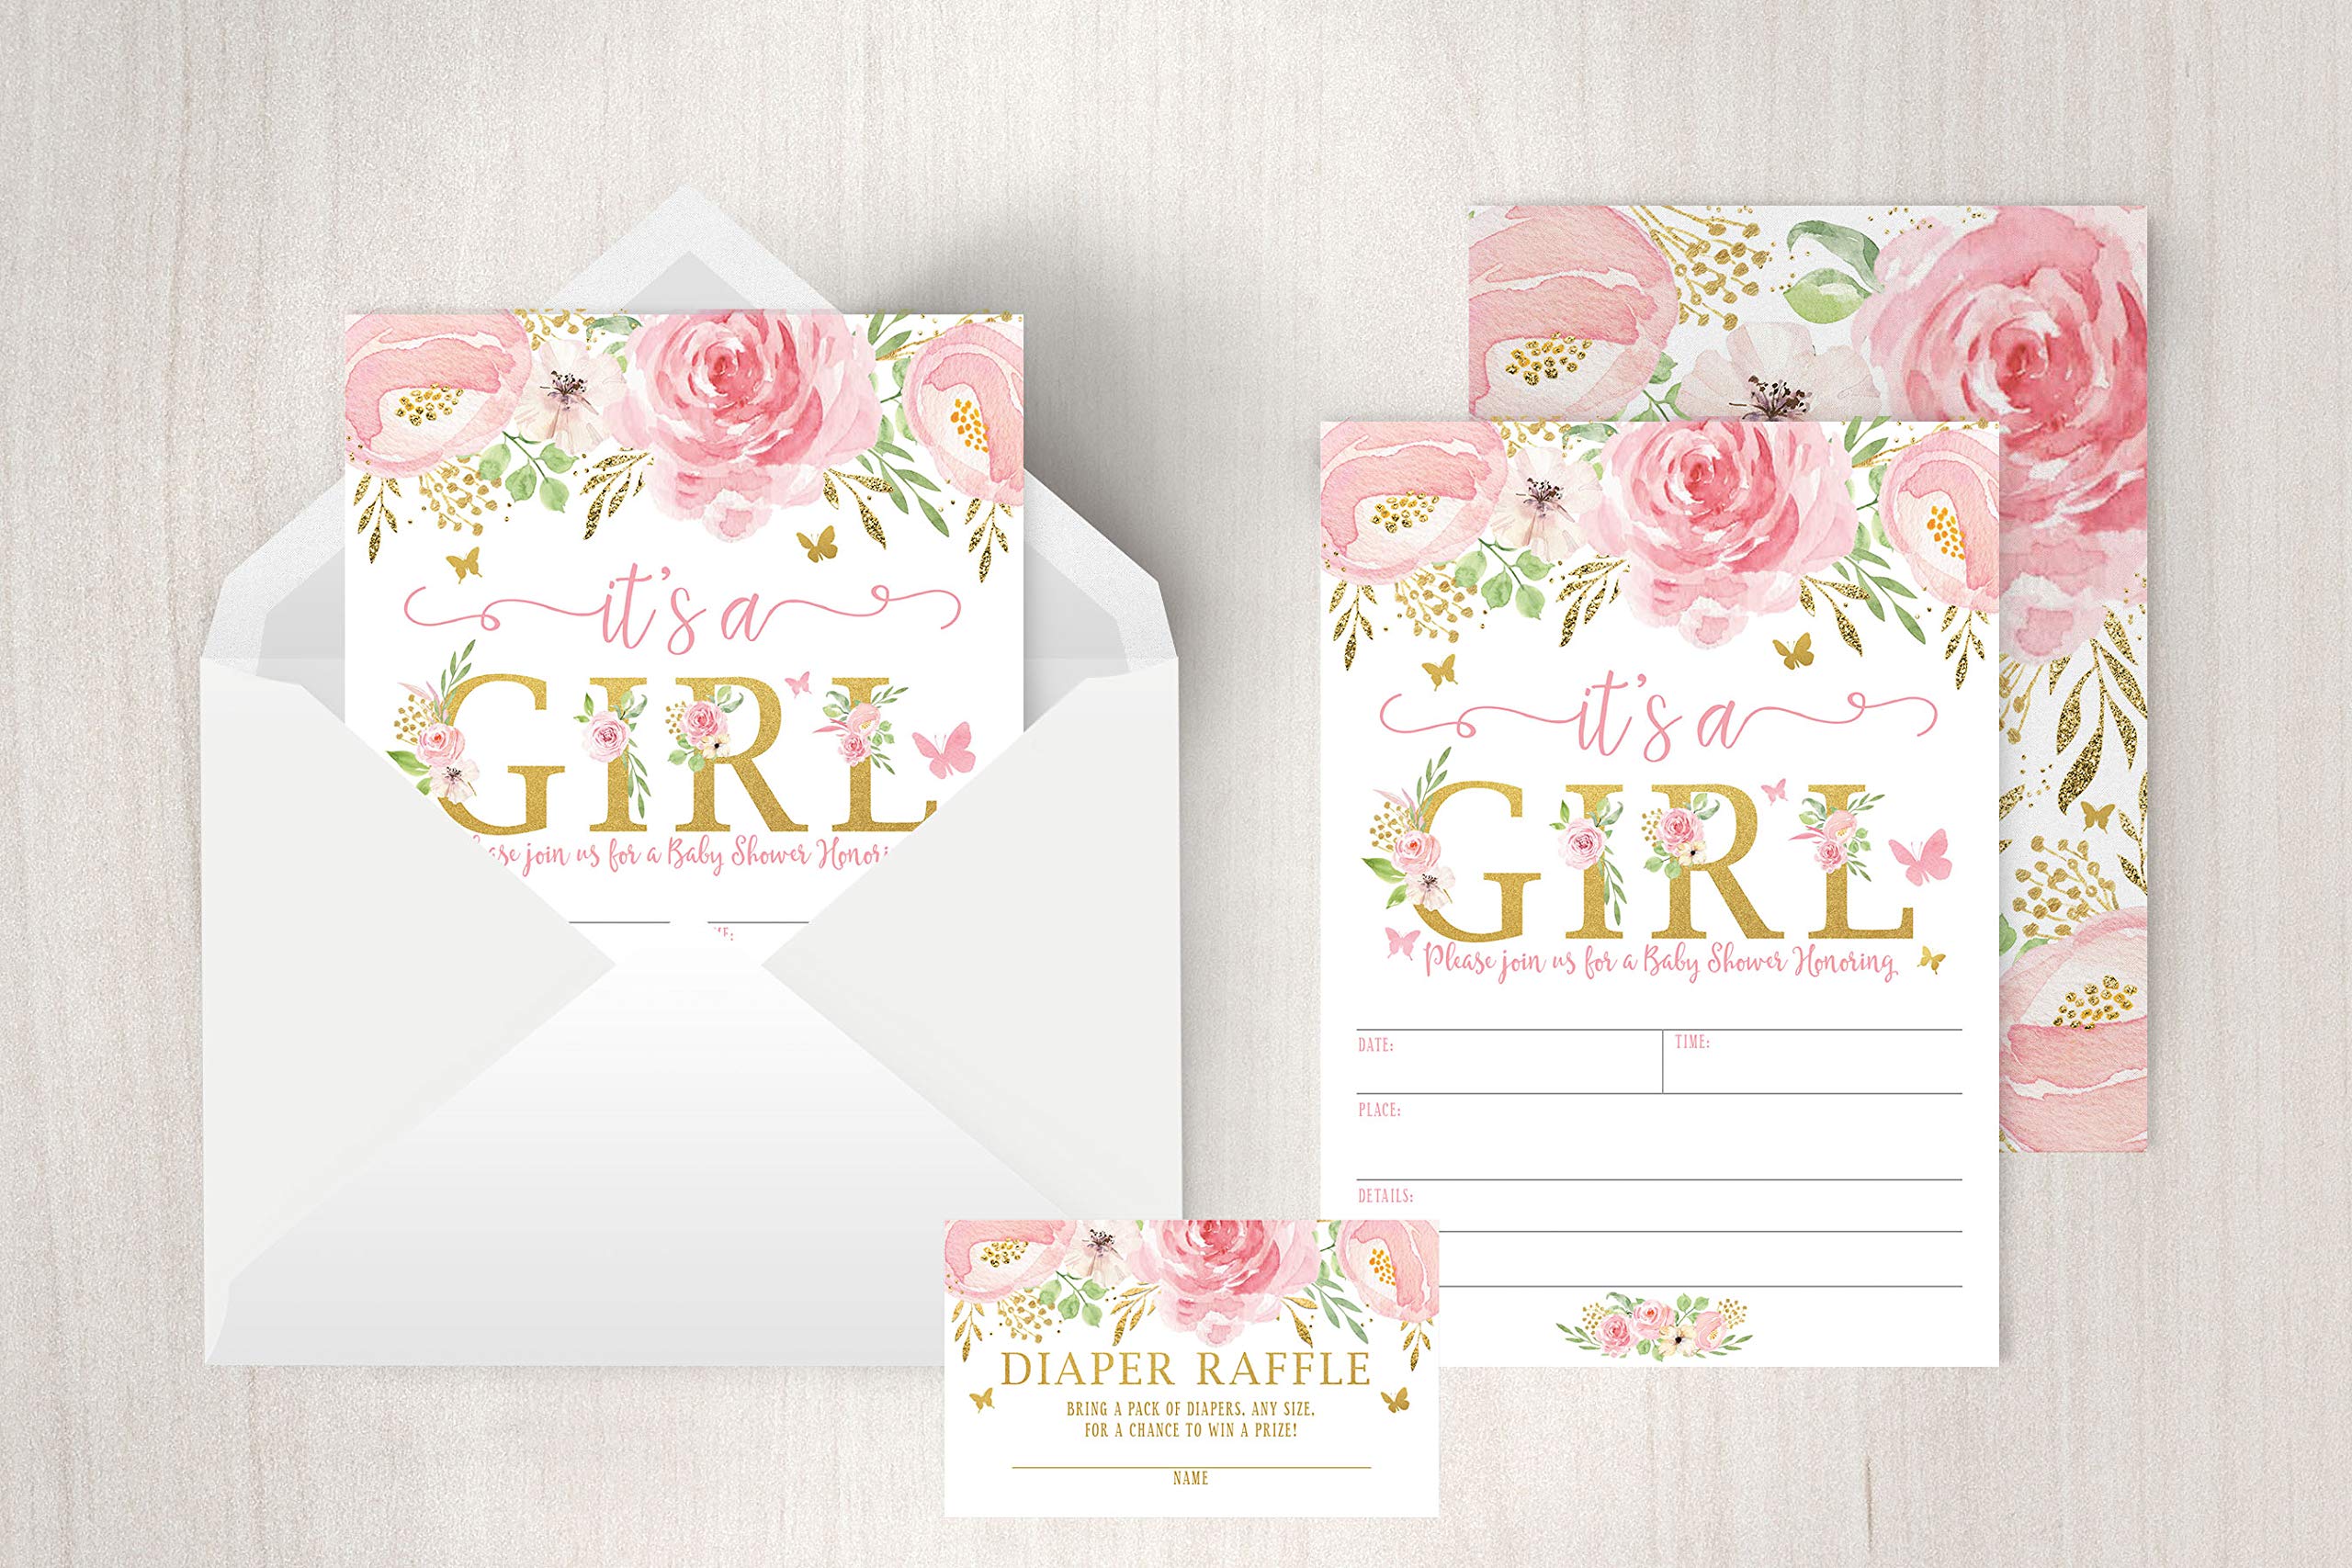 Your Main Event Prints It's a Girl Floral Butterfly Baby Shower Invitation, Pink and Gold Flowers Sprinkle Invites with Diaper Raffle Ticket Cards